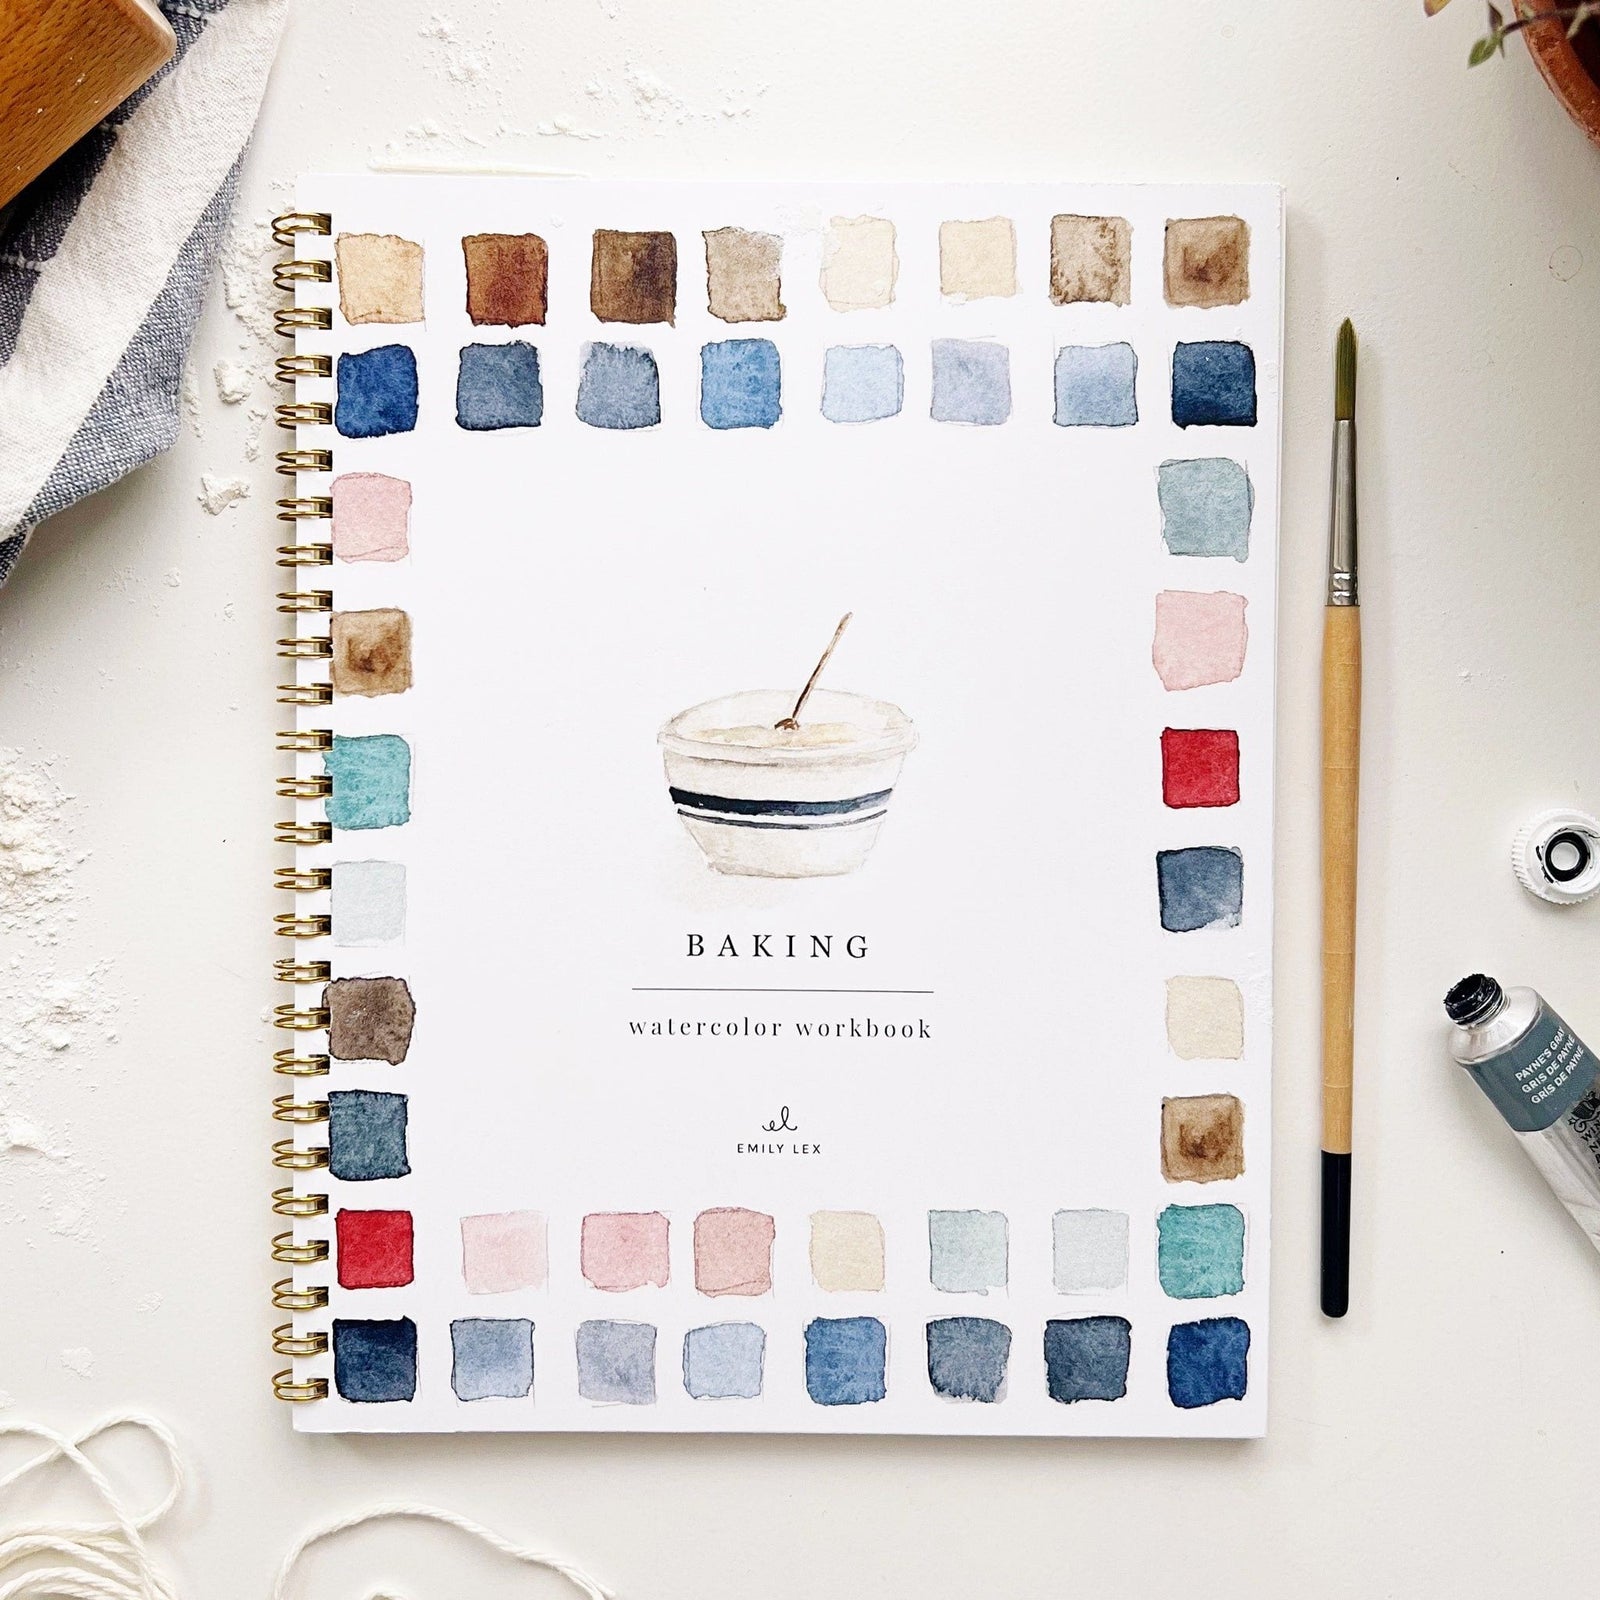 Watercolor Workbook: A Complete Course in Ten Lessons [Book]